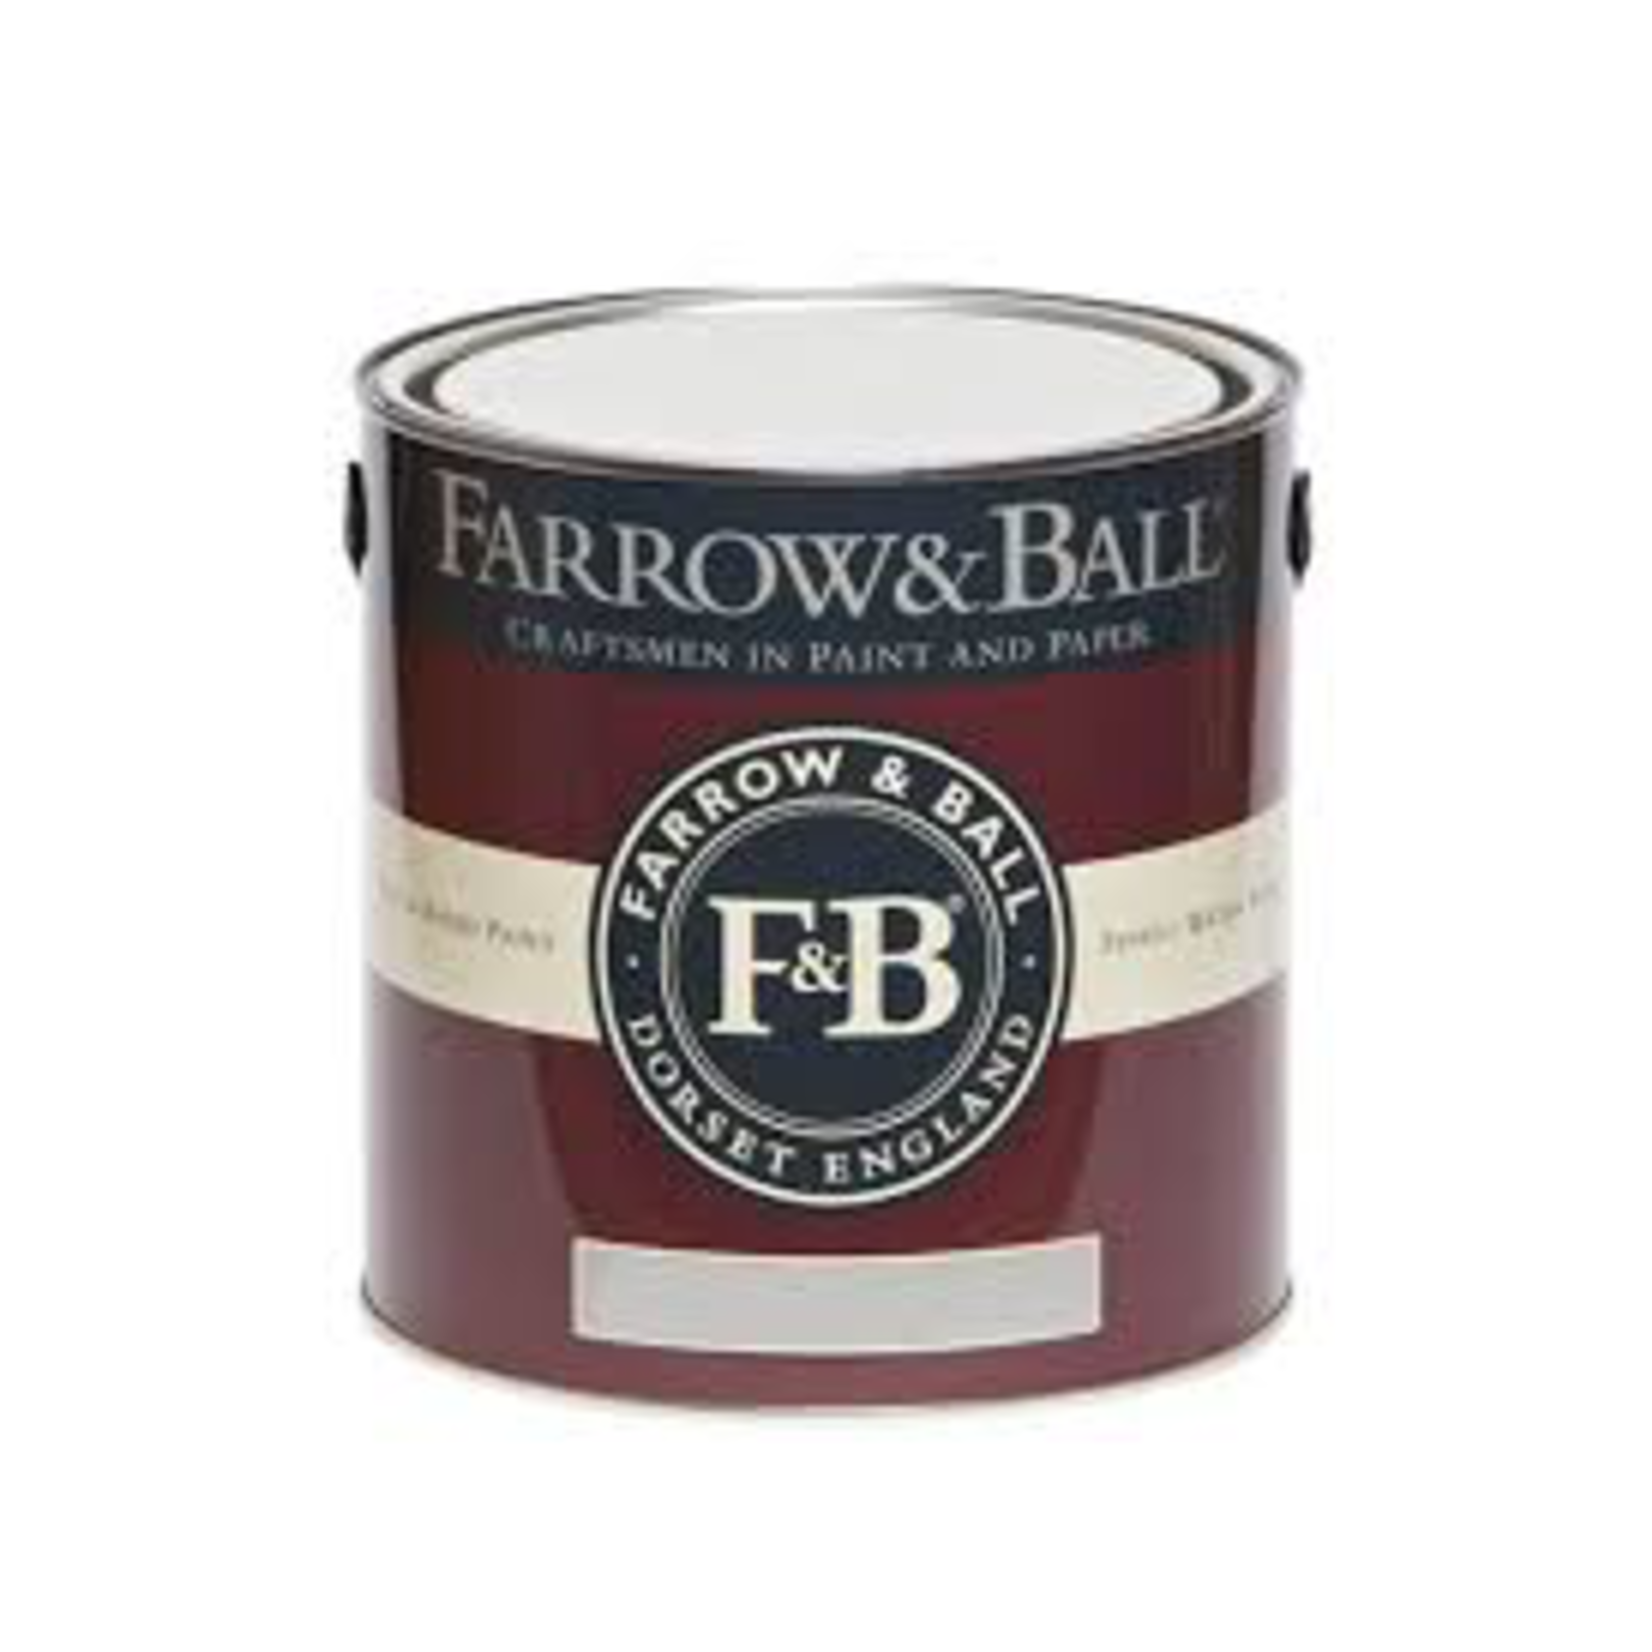 Farrow and Ball Archived paint - Exterior Eggshell - Gallon